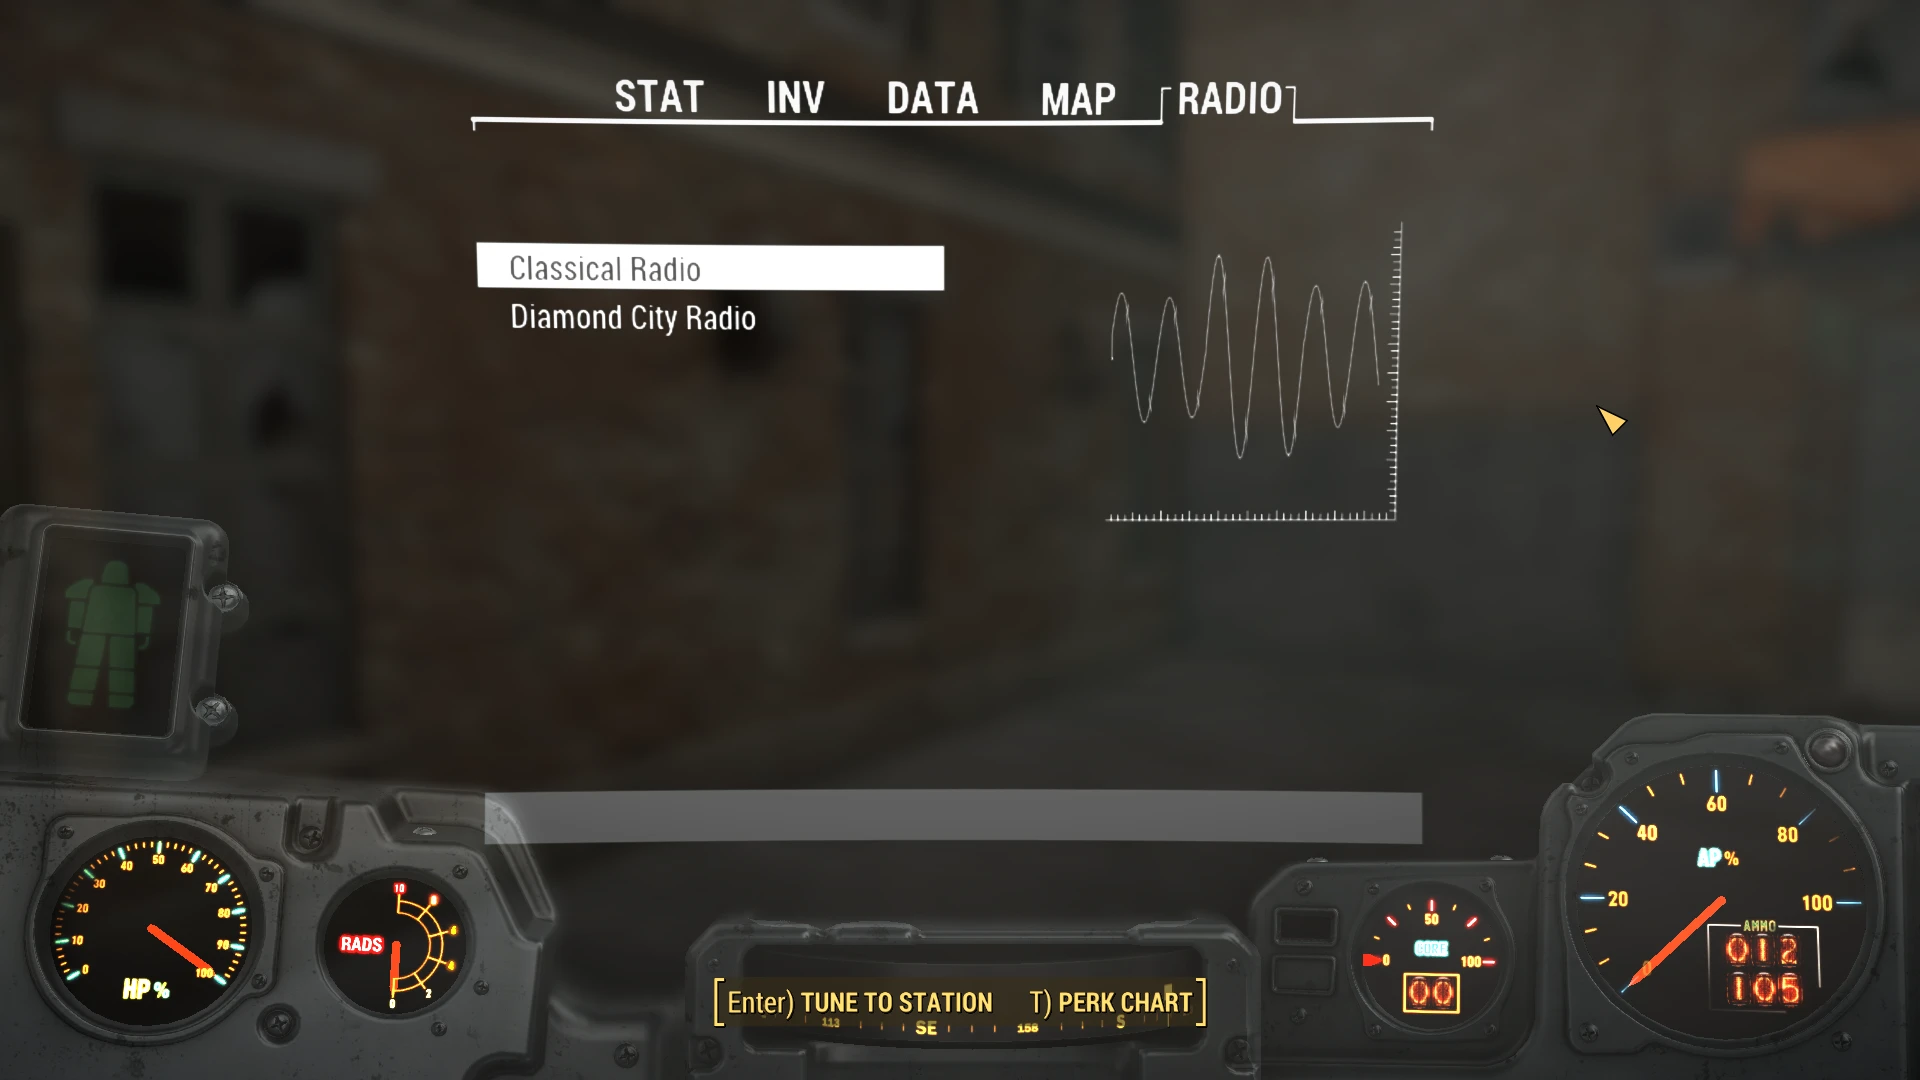 Interface Colored Power Armor[Fallout 4 Mods] 7919-2-1452207091